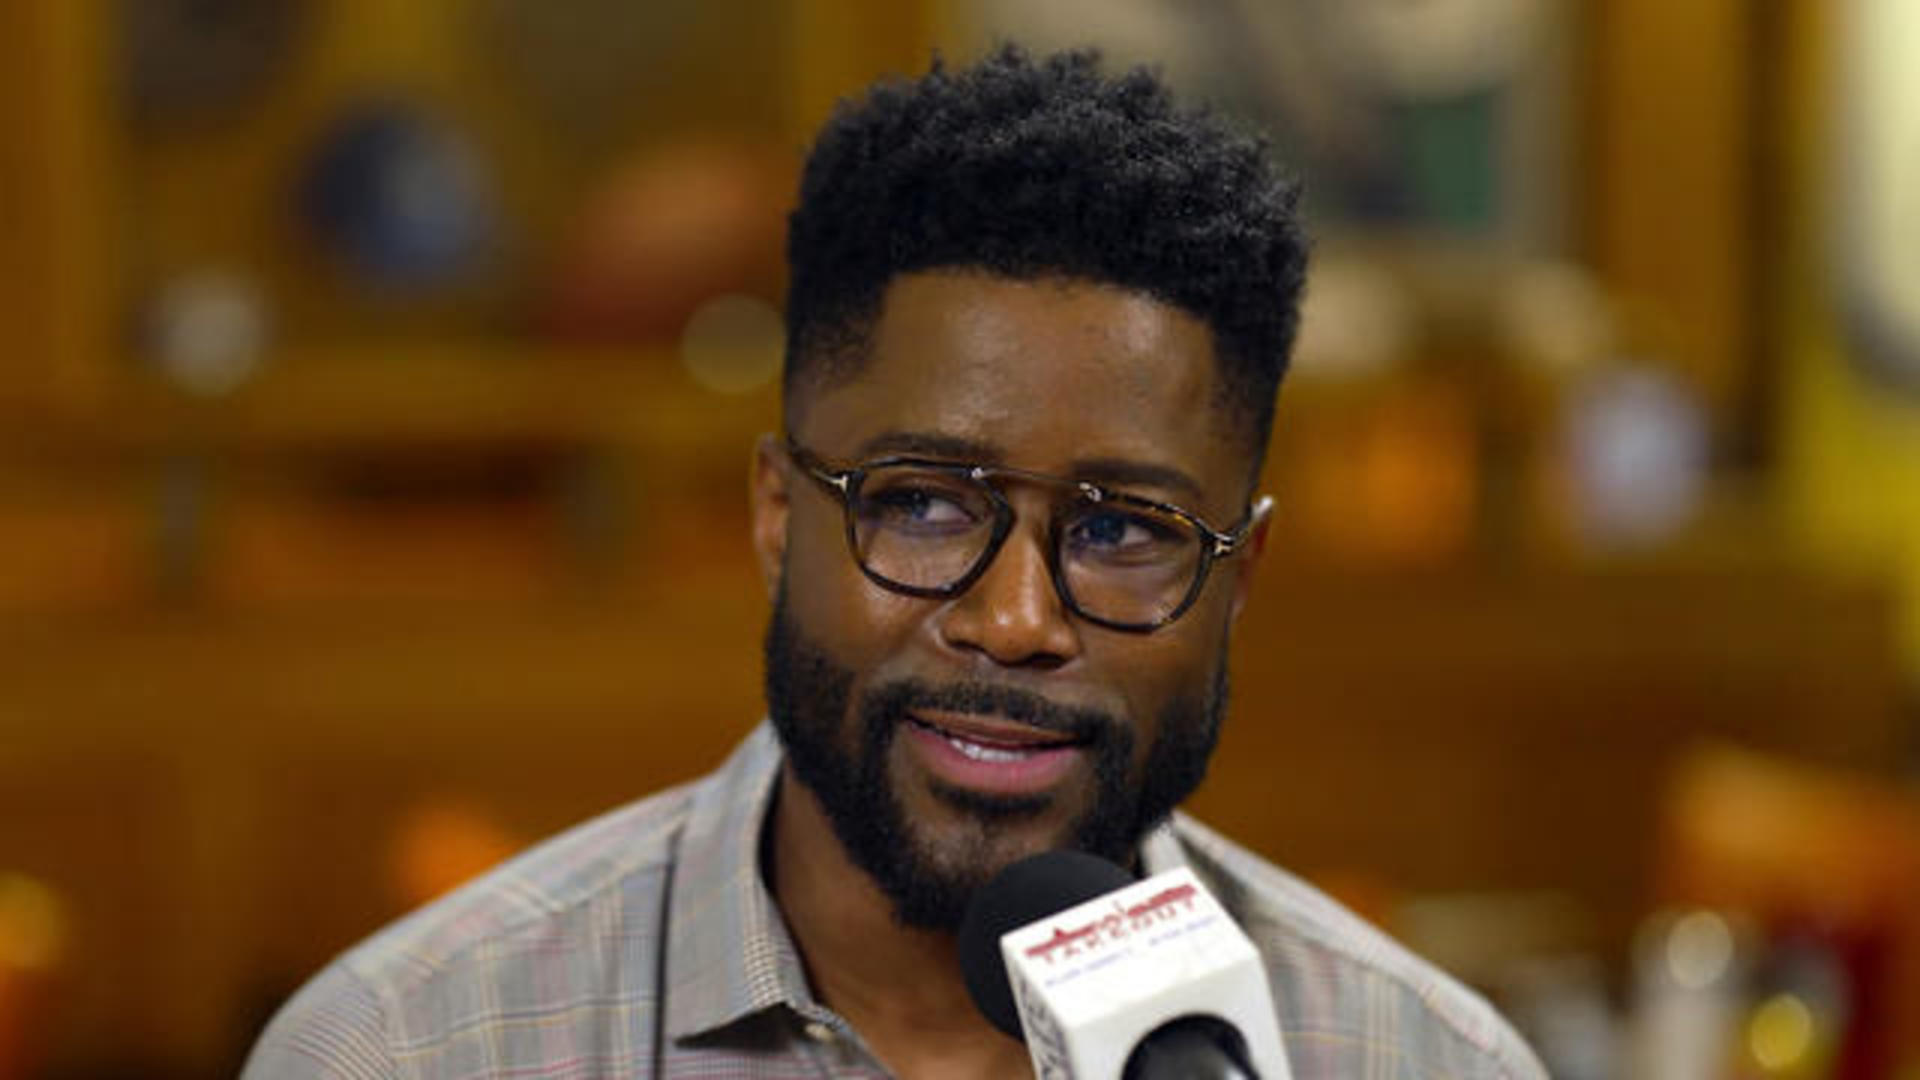 Nate Burleson to headline Wolf Pack's Governor's Dinner